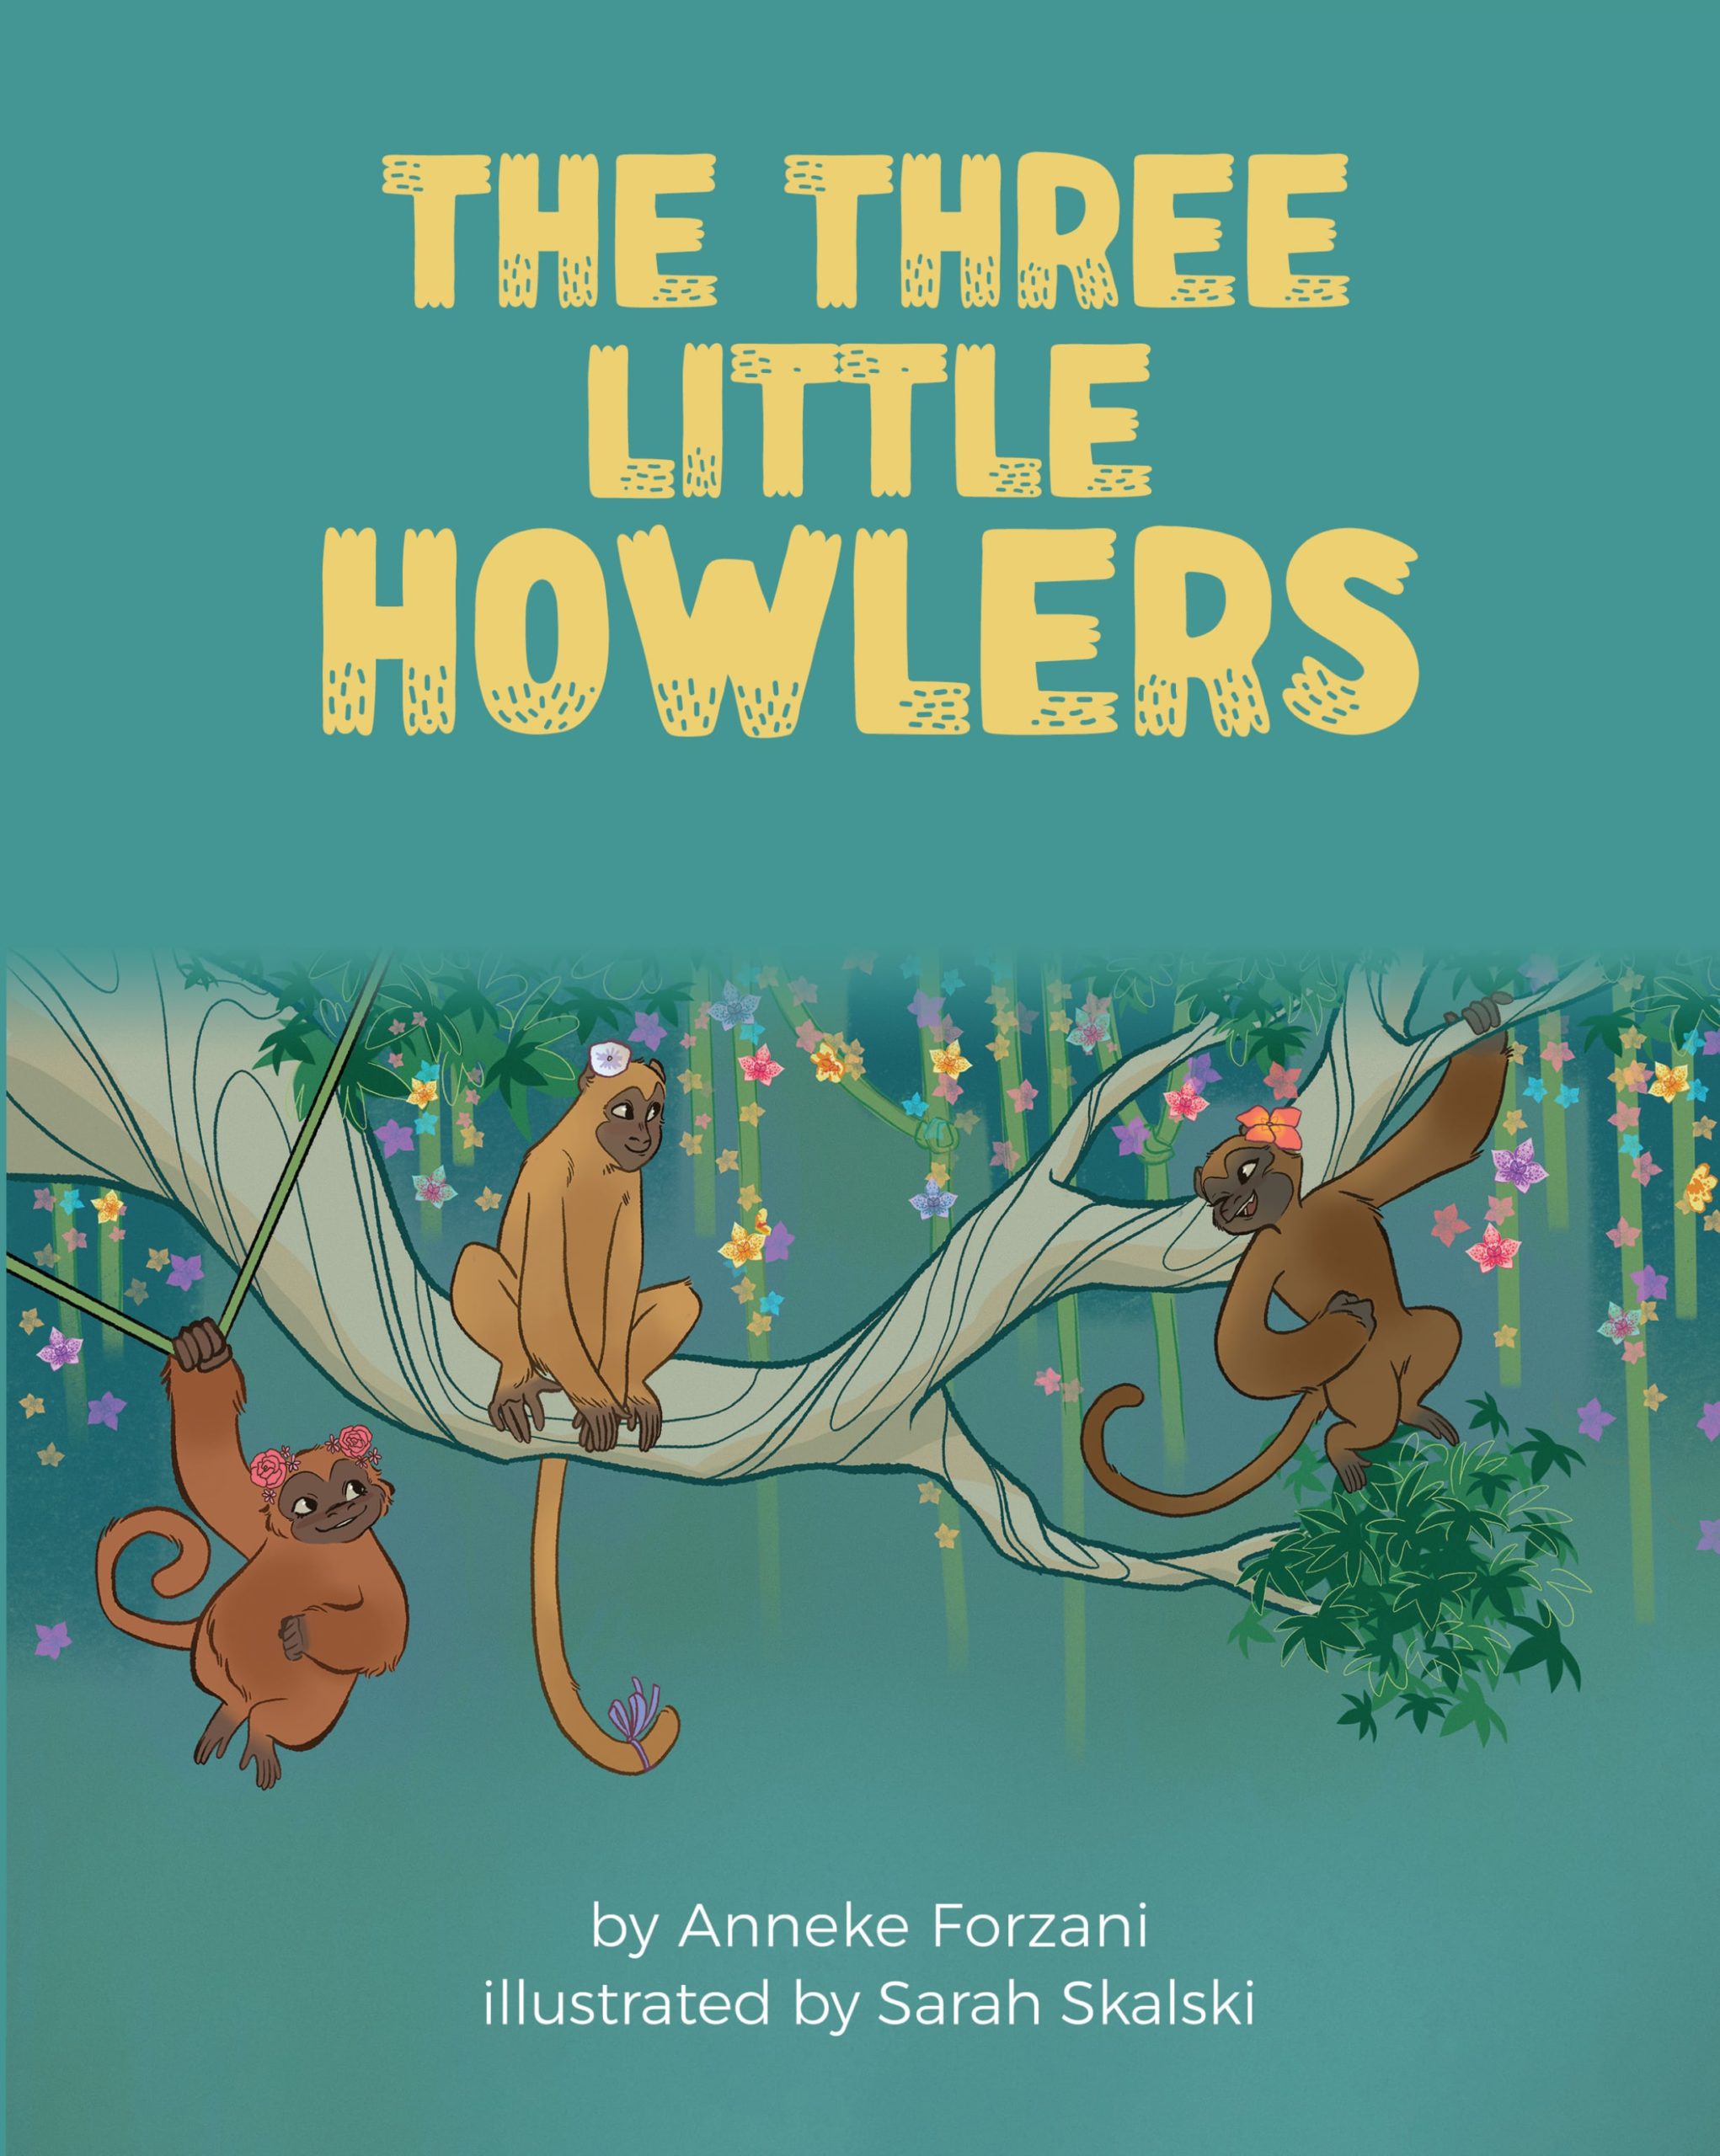 The Three Little Howlers